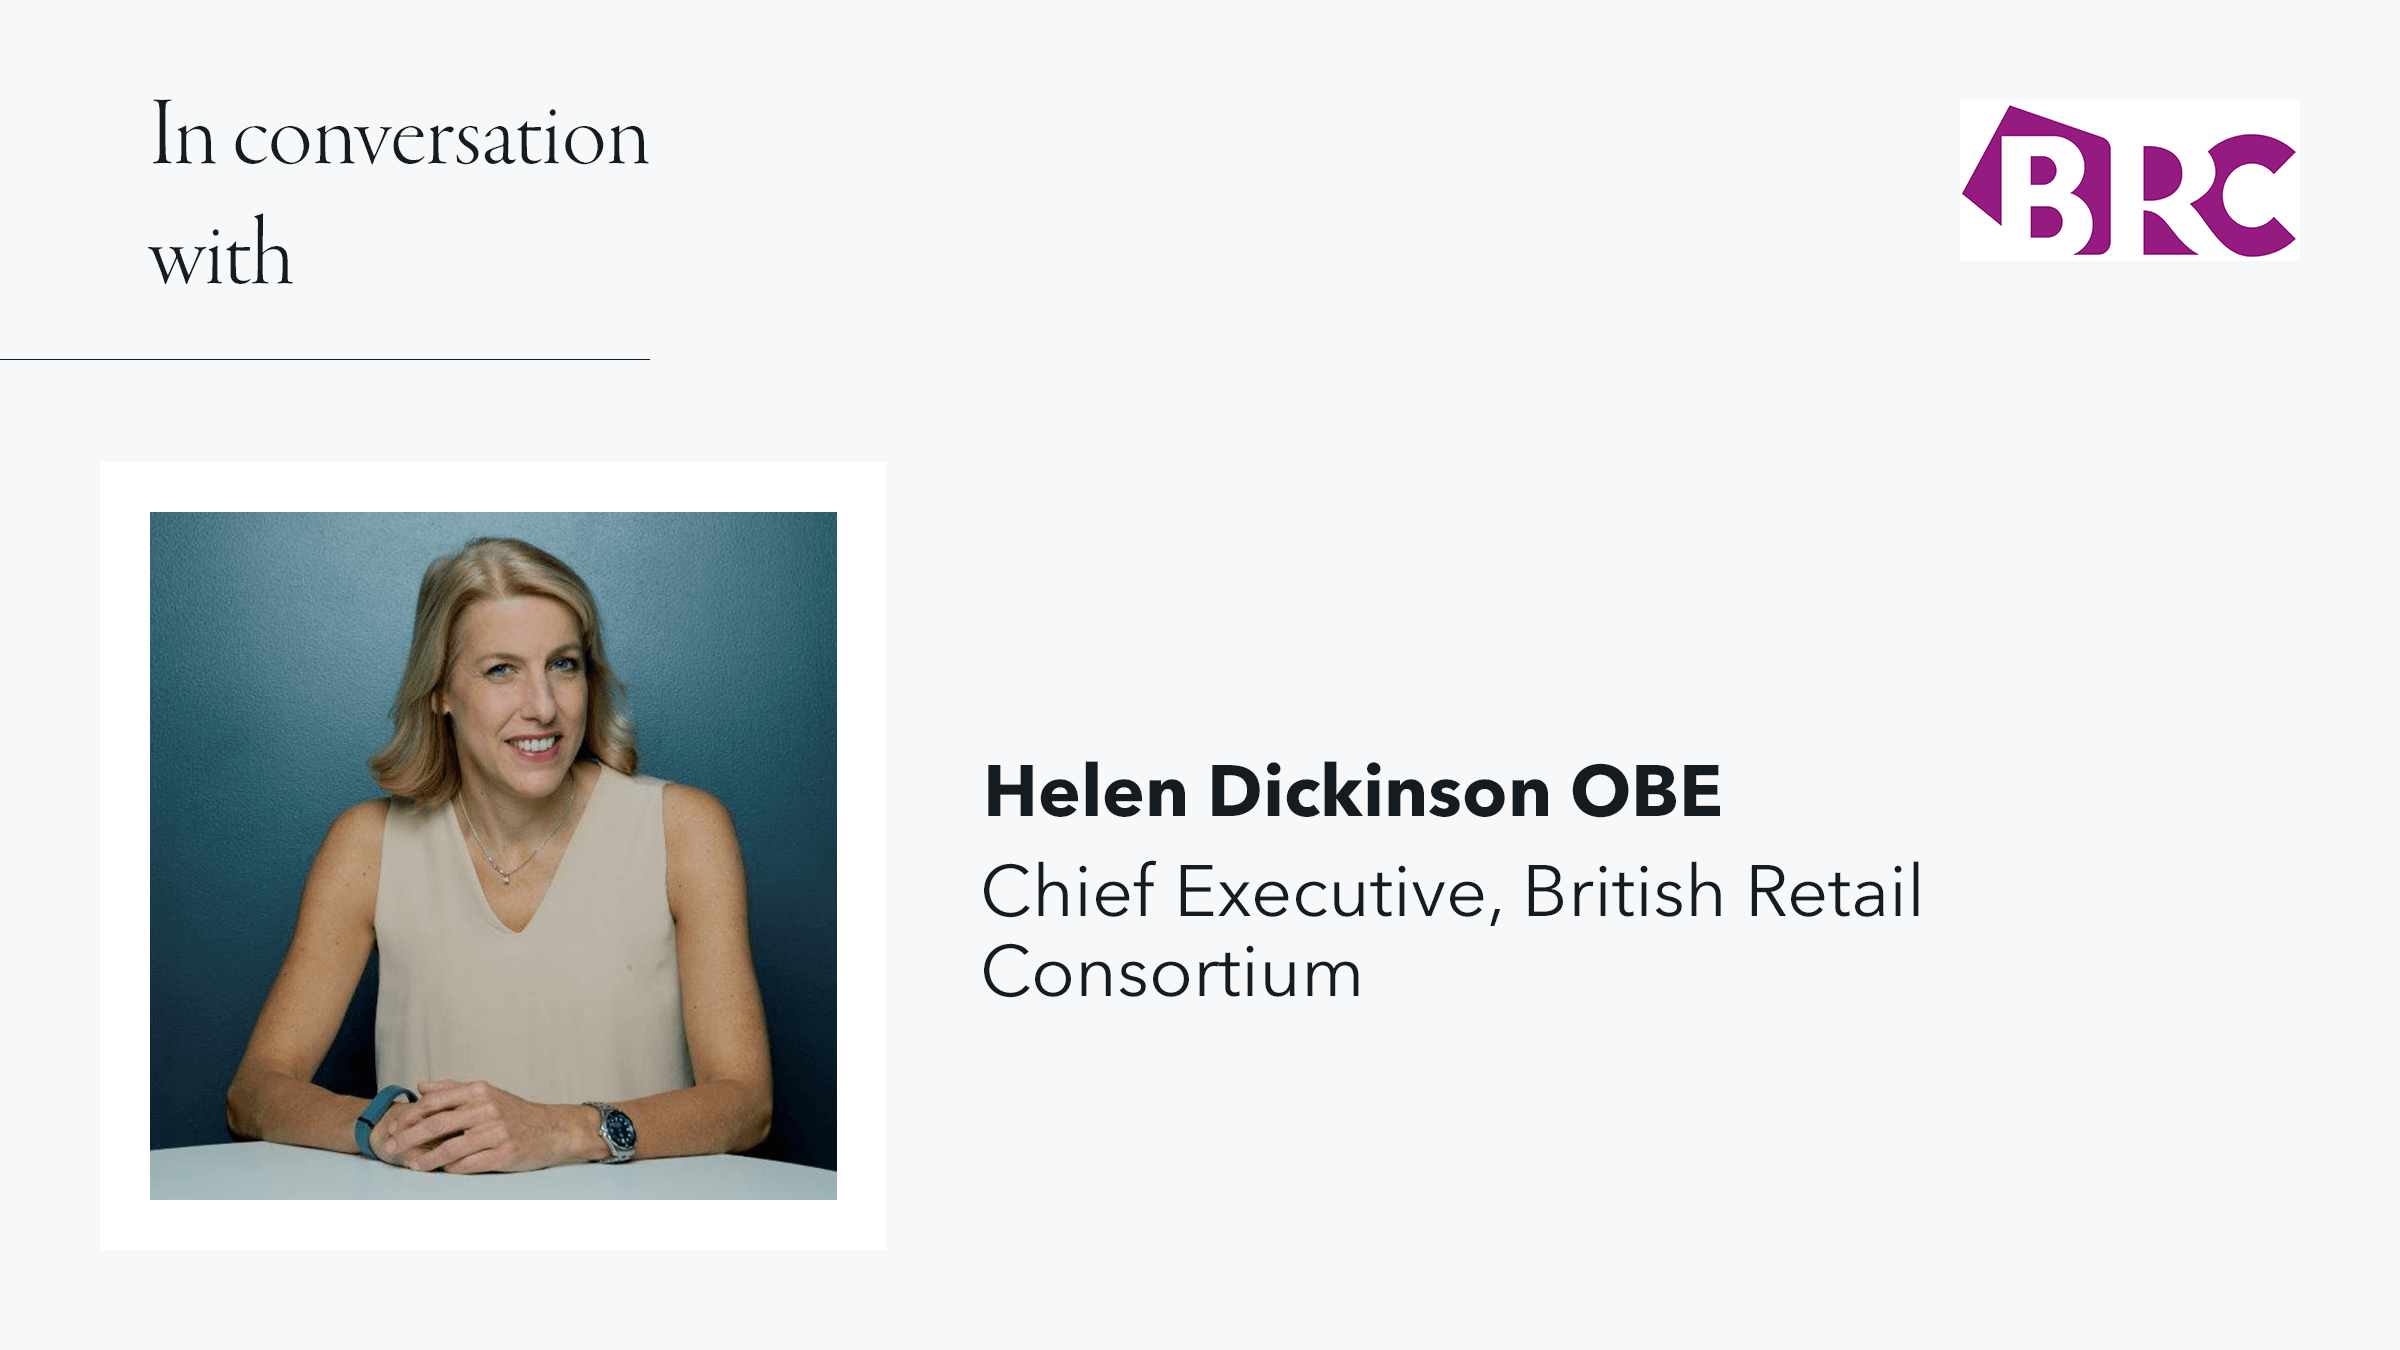 In conversation with Helen Dickinson OBE, CEO at BRC